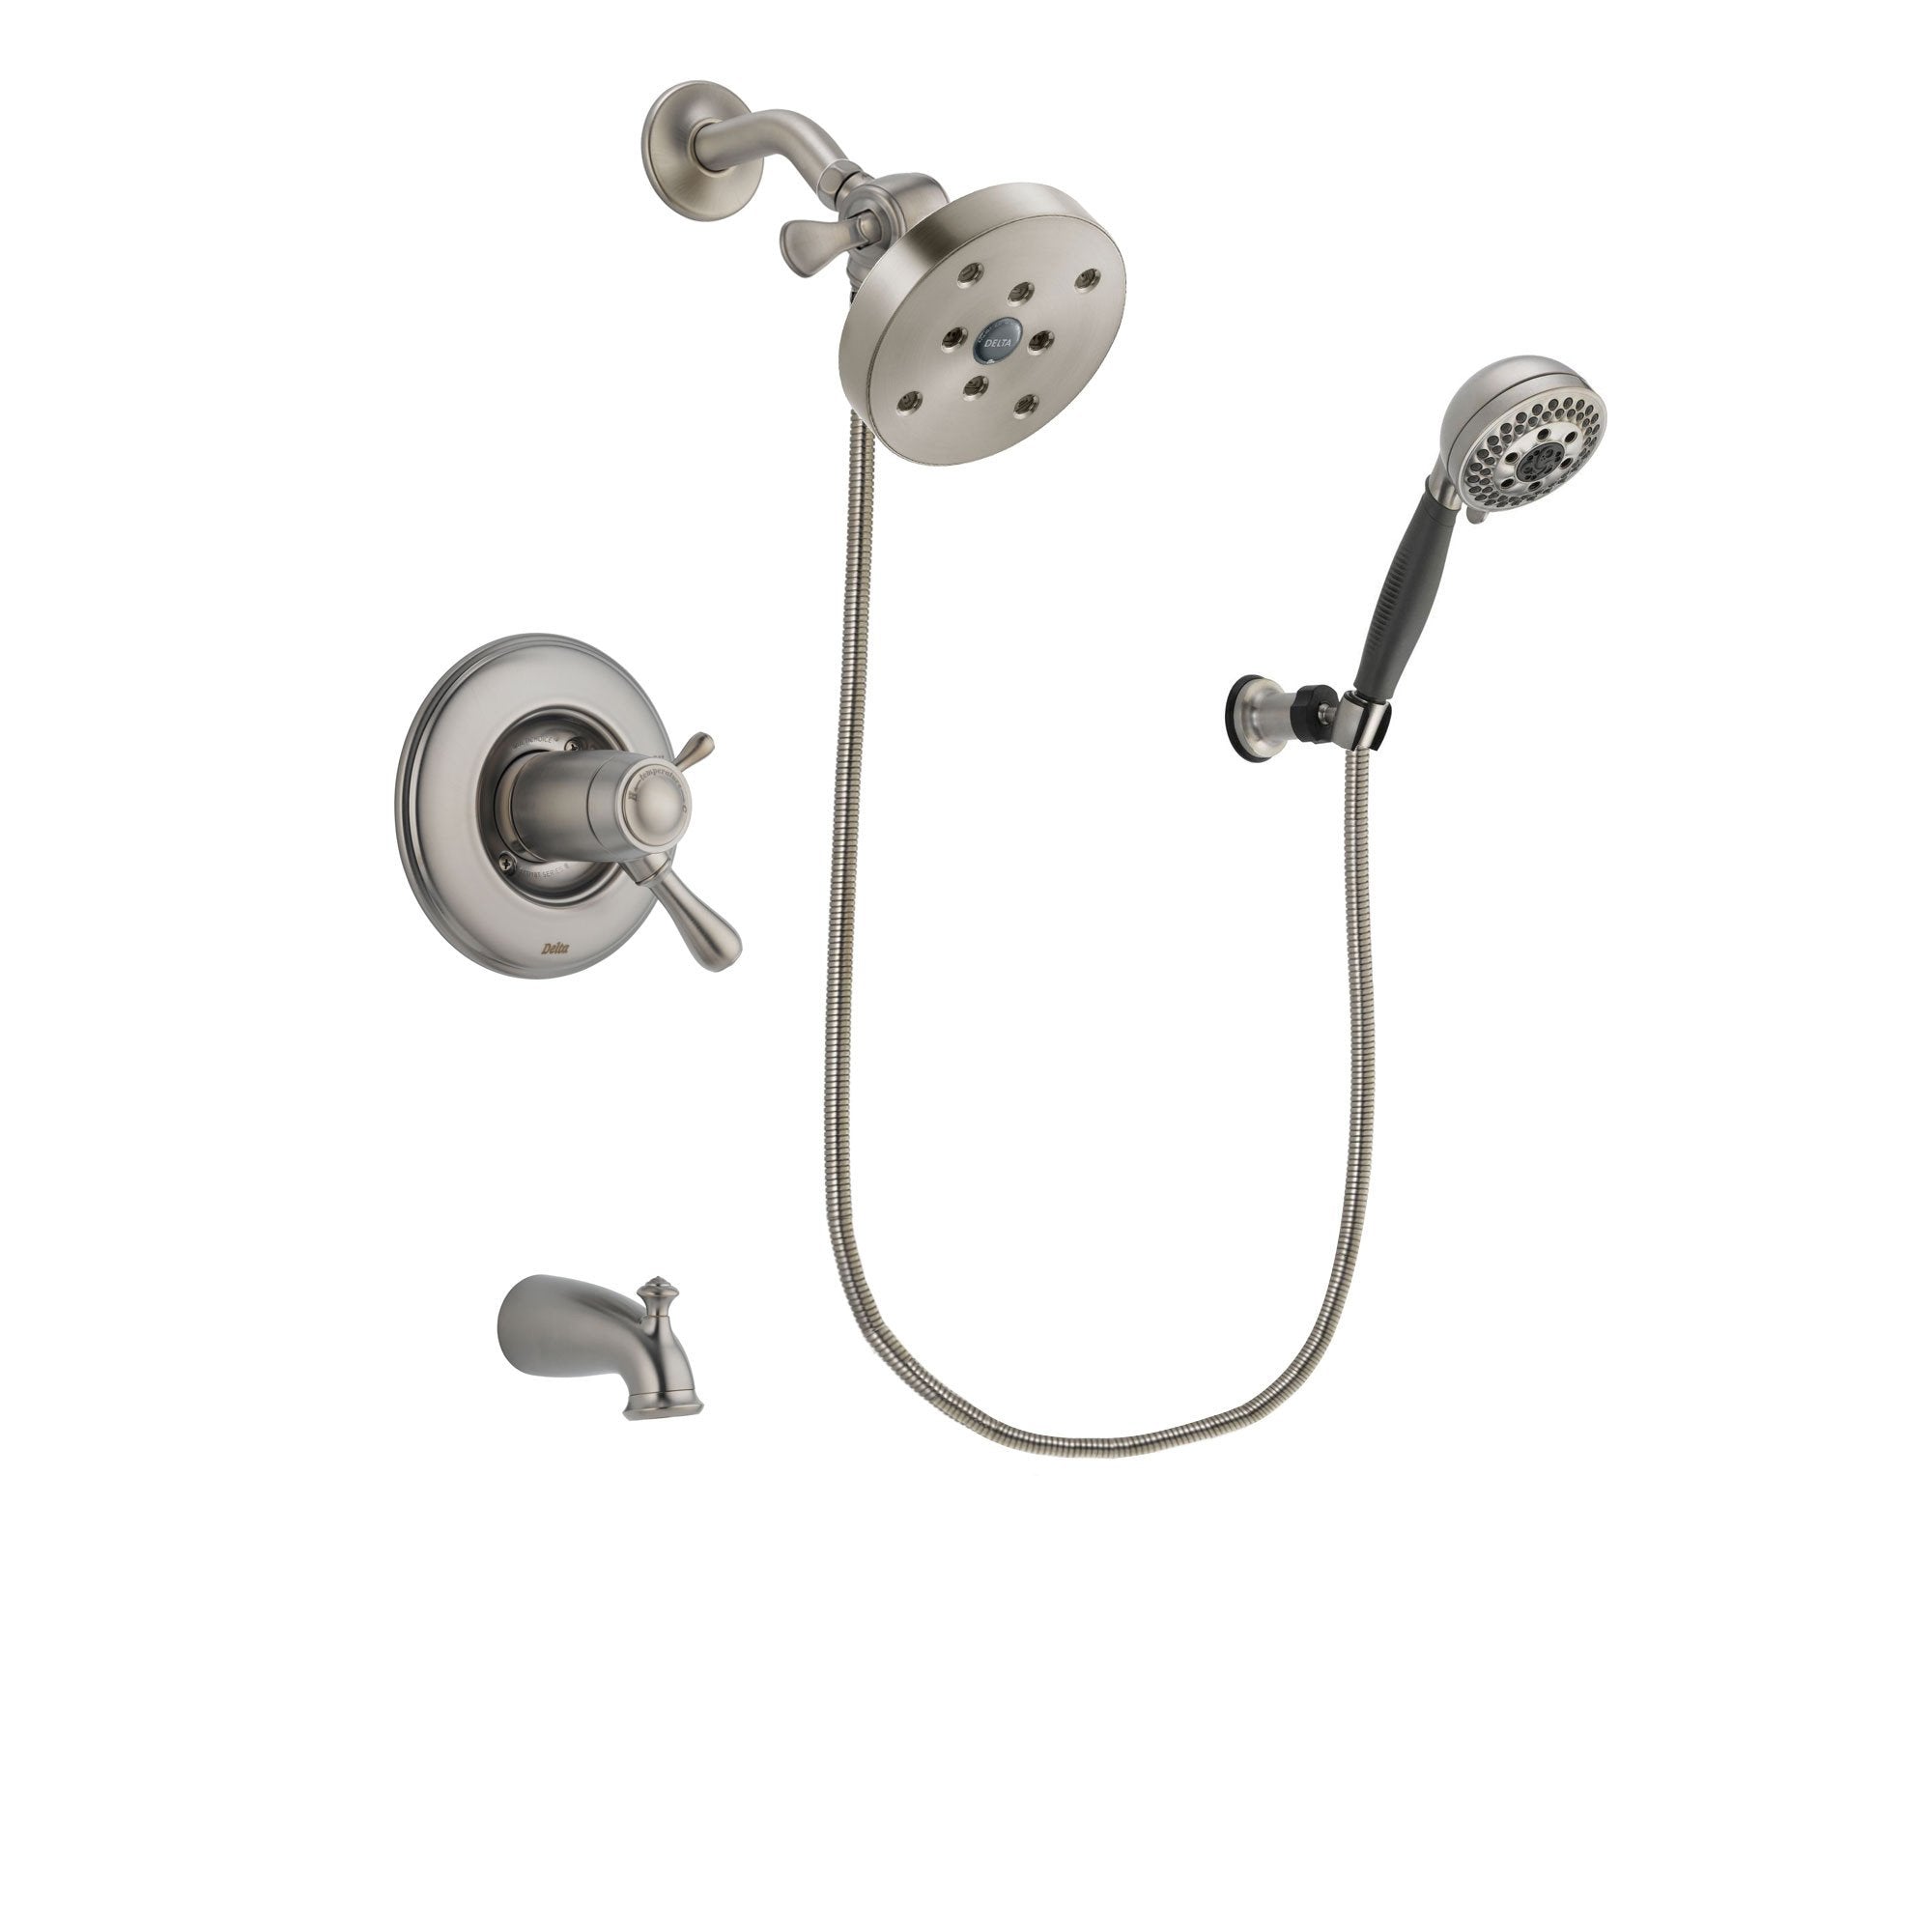 Delta Leland Stainless Steel Finish Thermostatic Tub and Shower Faucet System Package with 5-1/2 inch Shower Head and 5-Setting Wall Mount Personal Handheld Shower Includes Rough-in Valve and Tub Spout DSP2027V